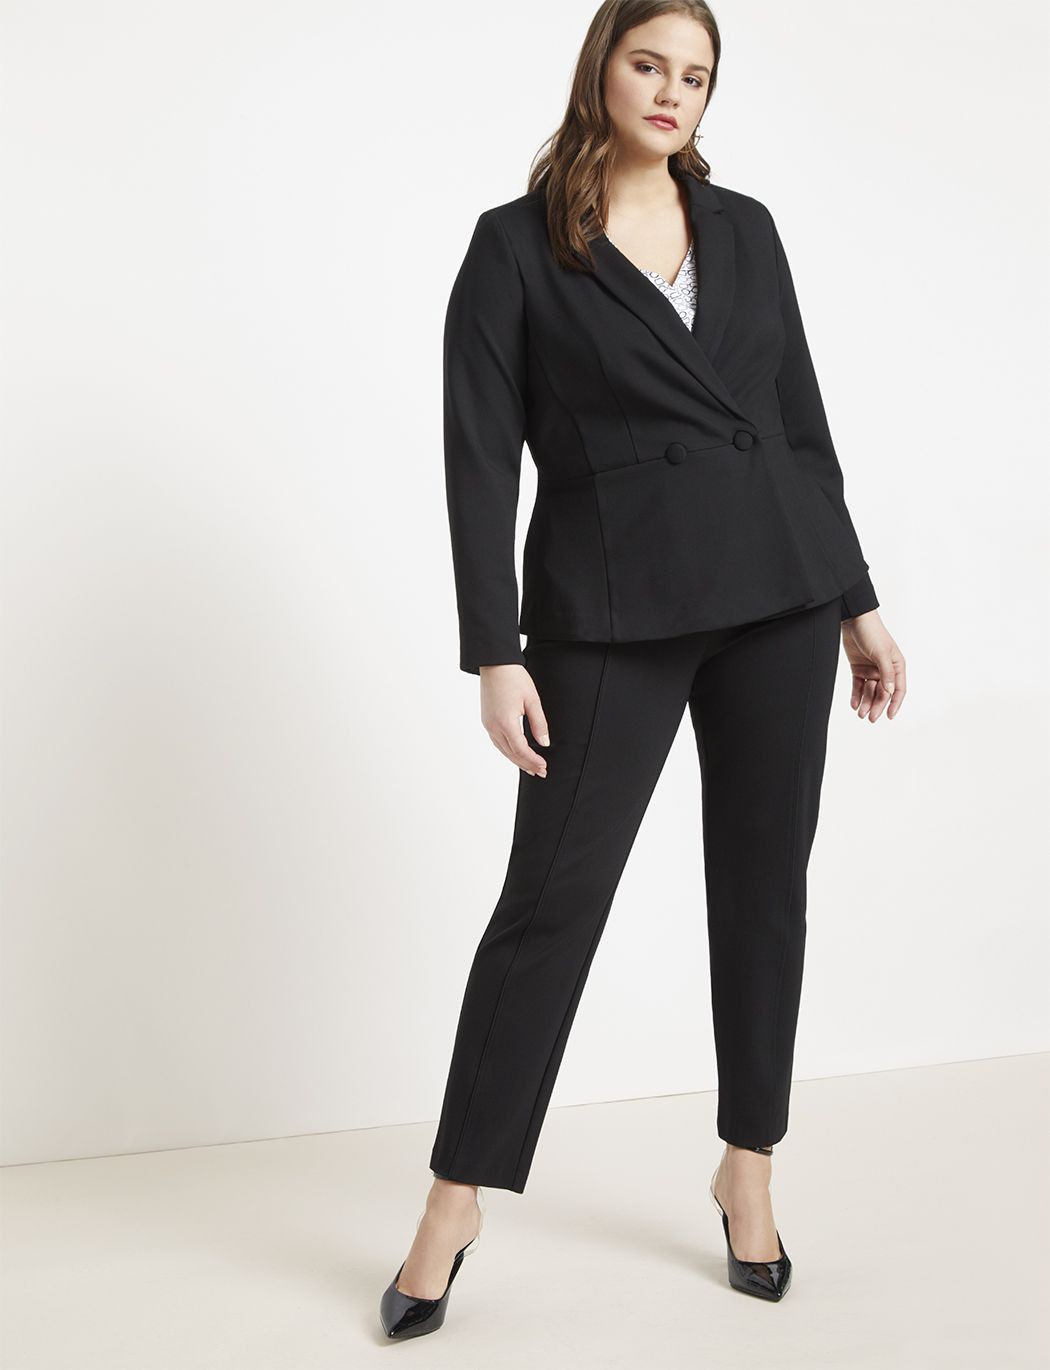 Lovely Casual Formal Attire For Plus Size Ladies: Plus Size Work Outfits,  Summer Work Outfit,  Casual Summer Work Outfit,  Trendy professional Outfit,  professional Outfit For Teens  